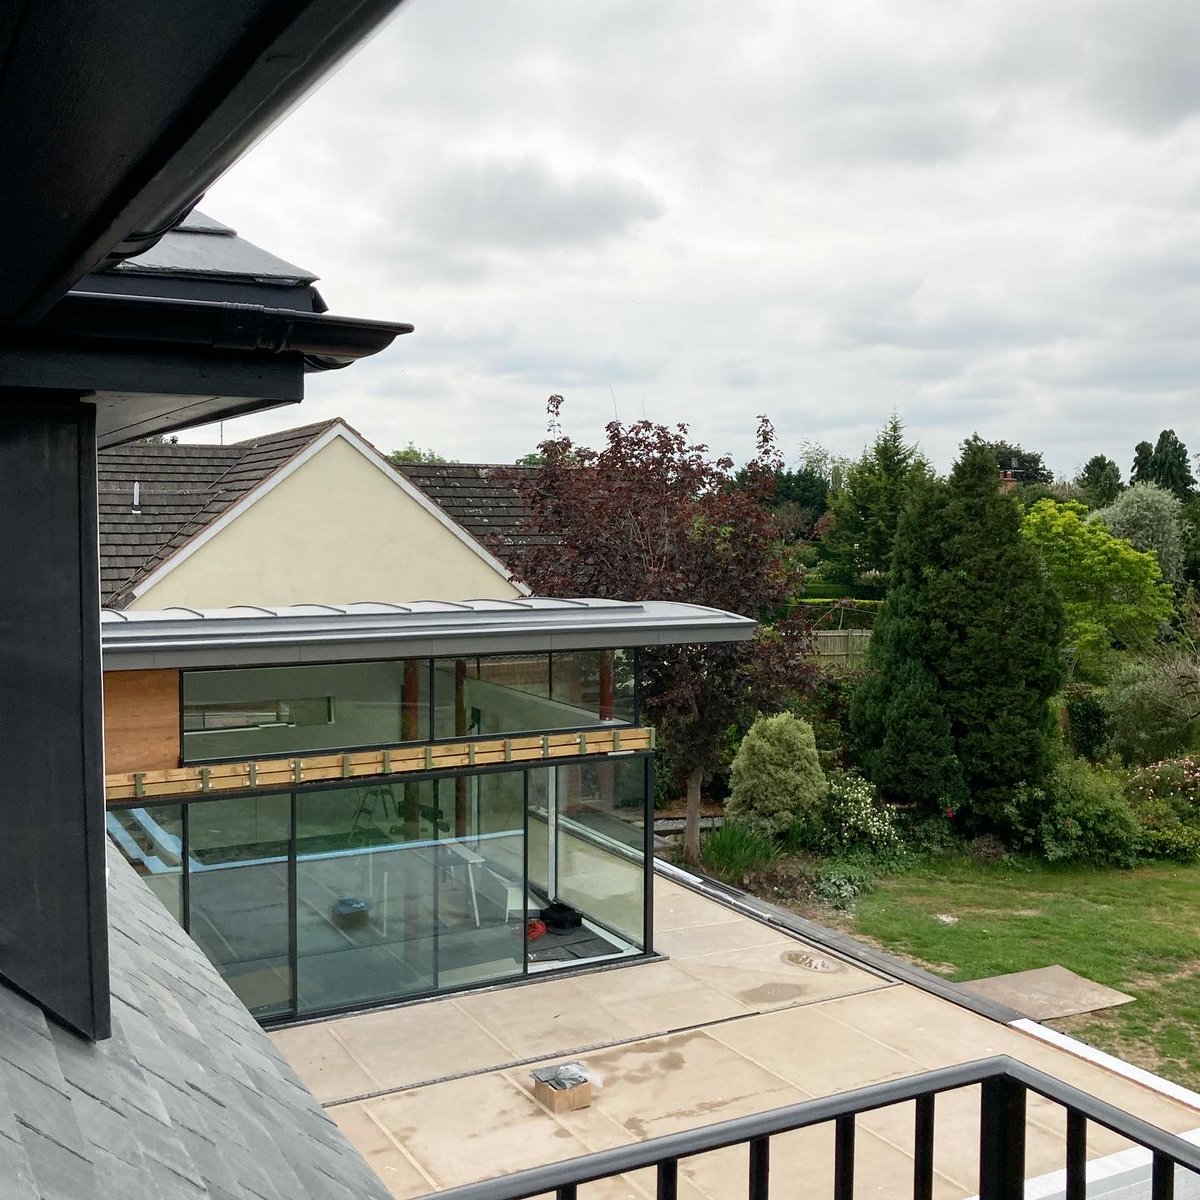 Getting closer to completion. Contemporary extension in Welford on Avon #architecture #zincroof #houseextension #residentialarchitecture #design